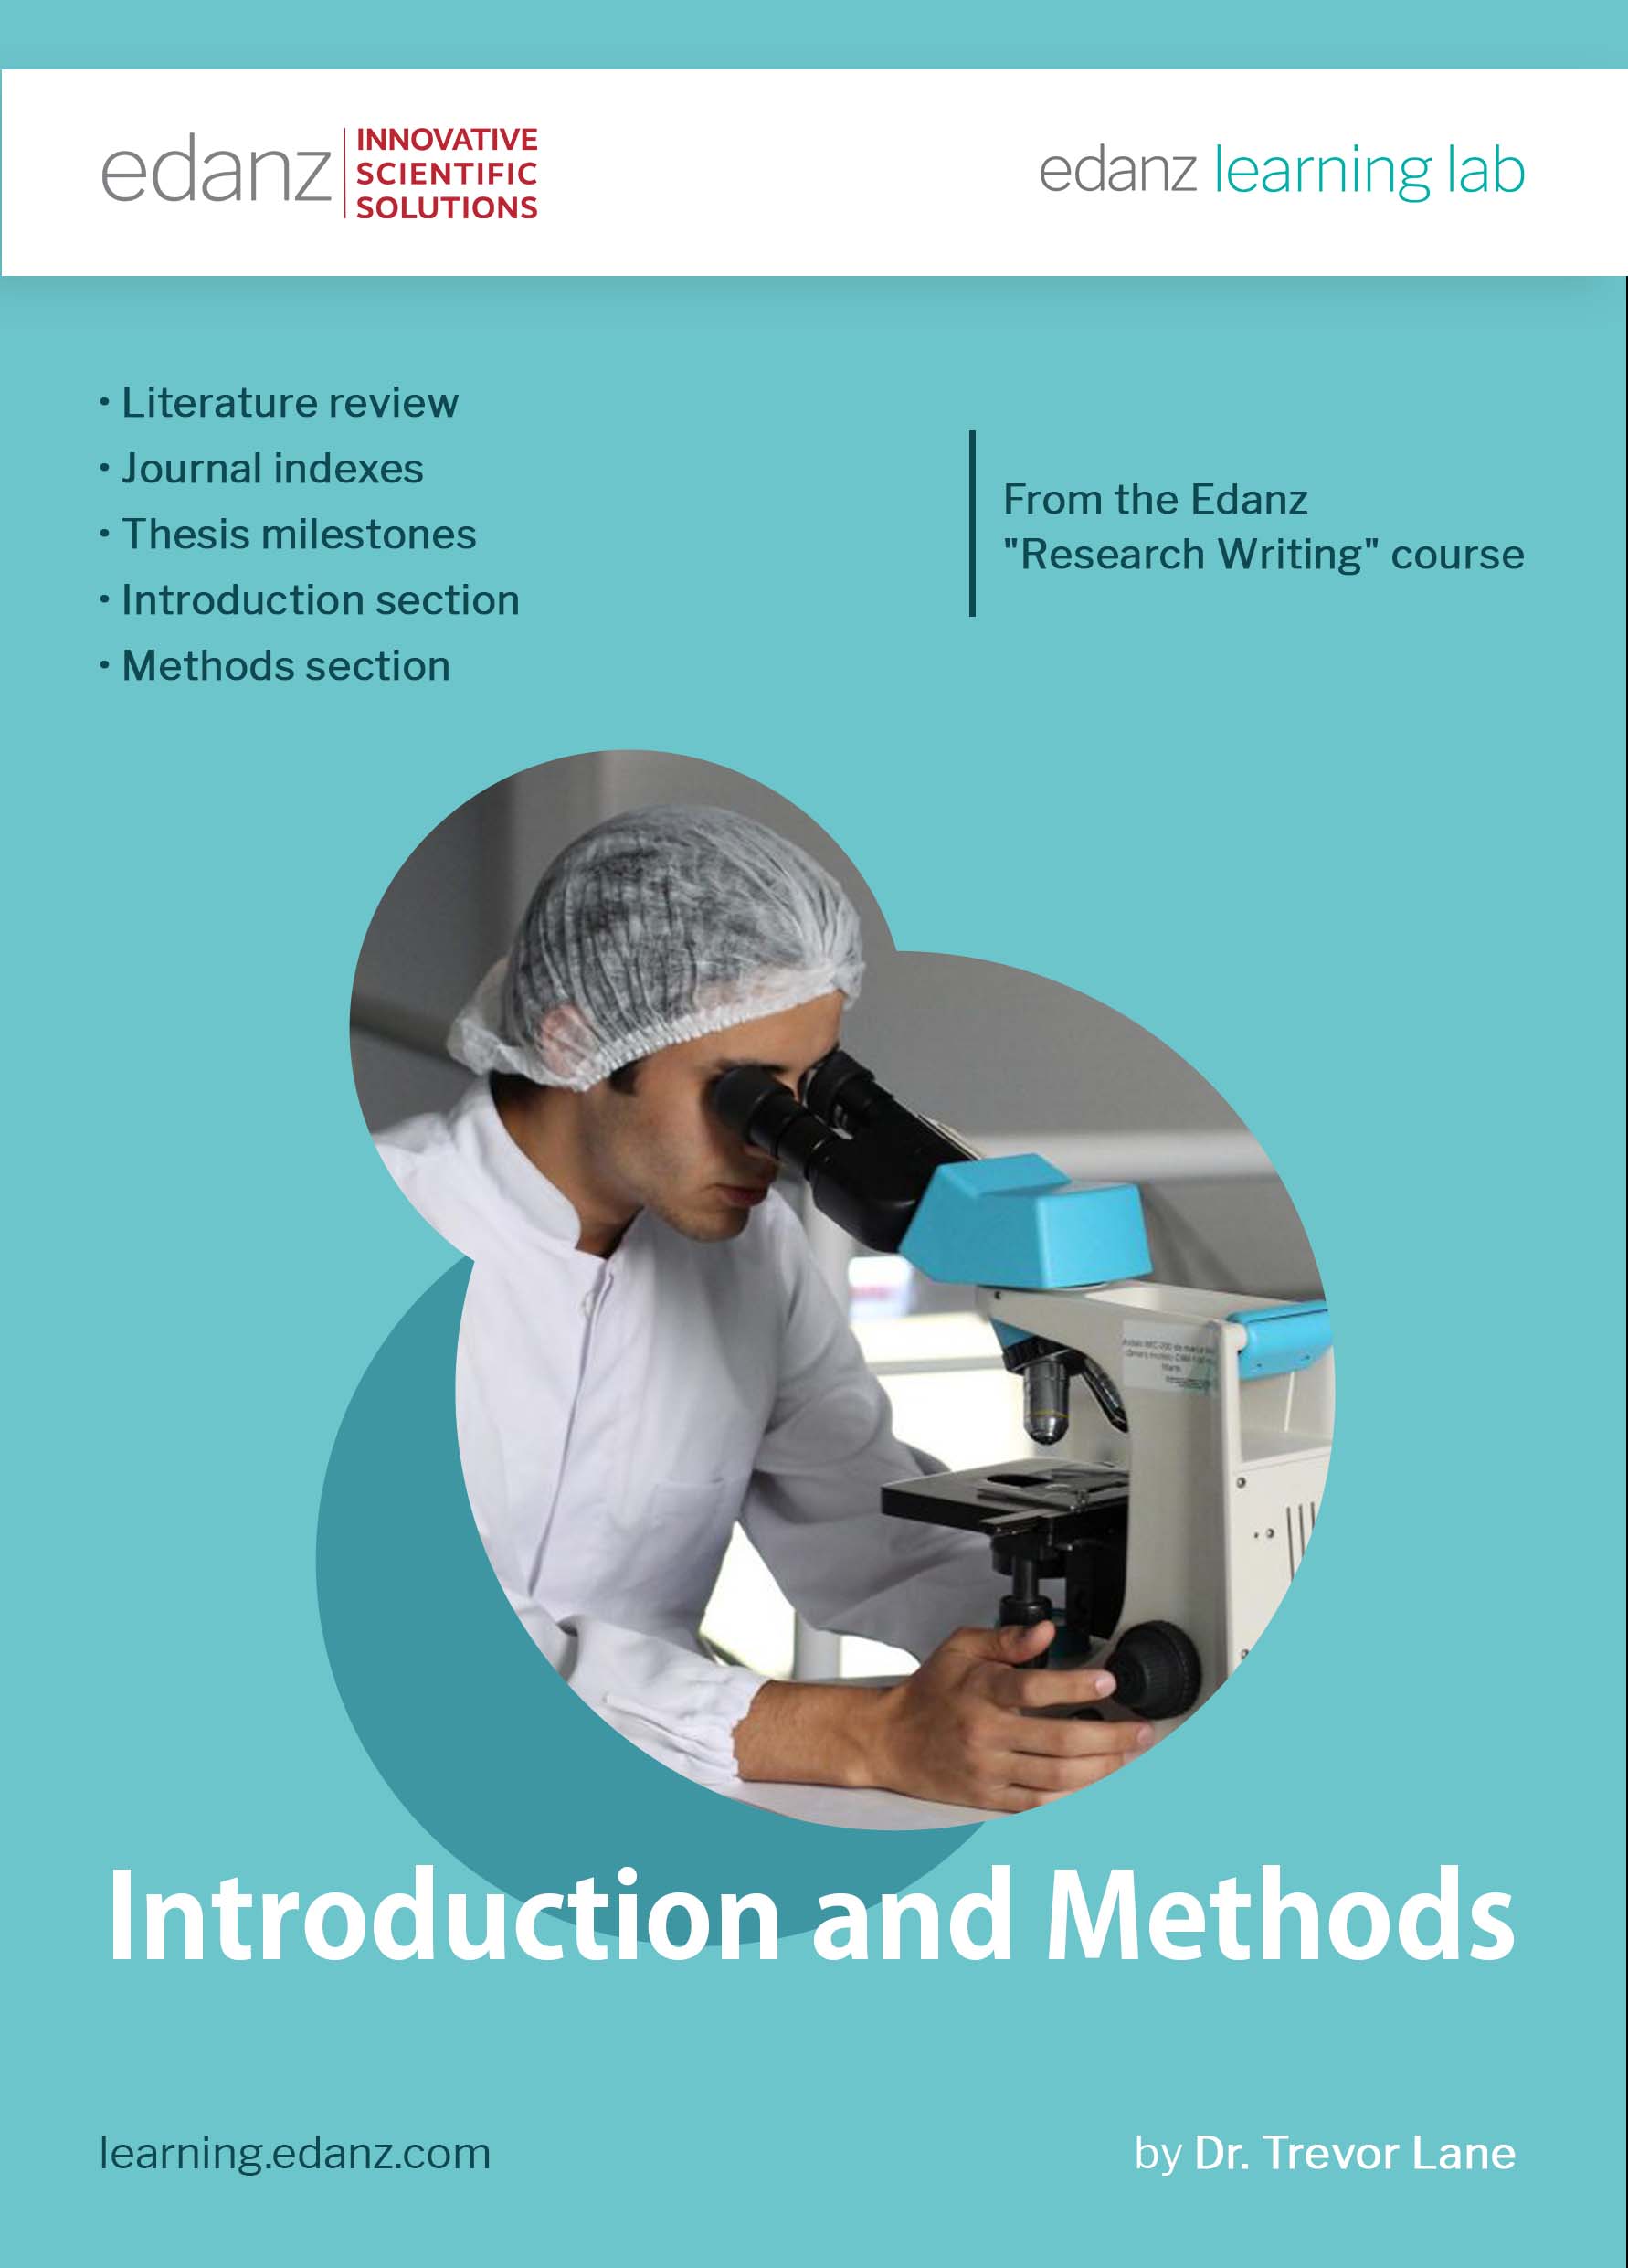 Introduction and Methods